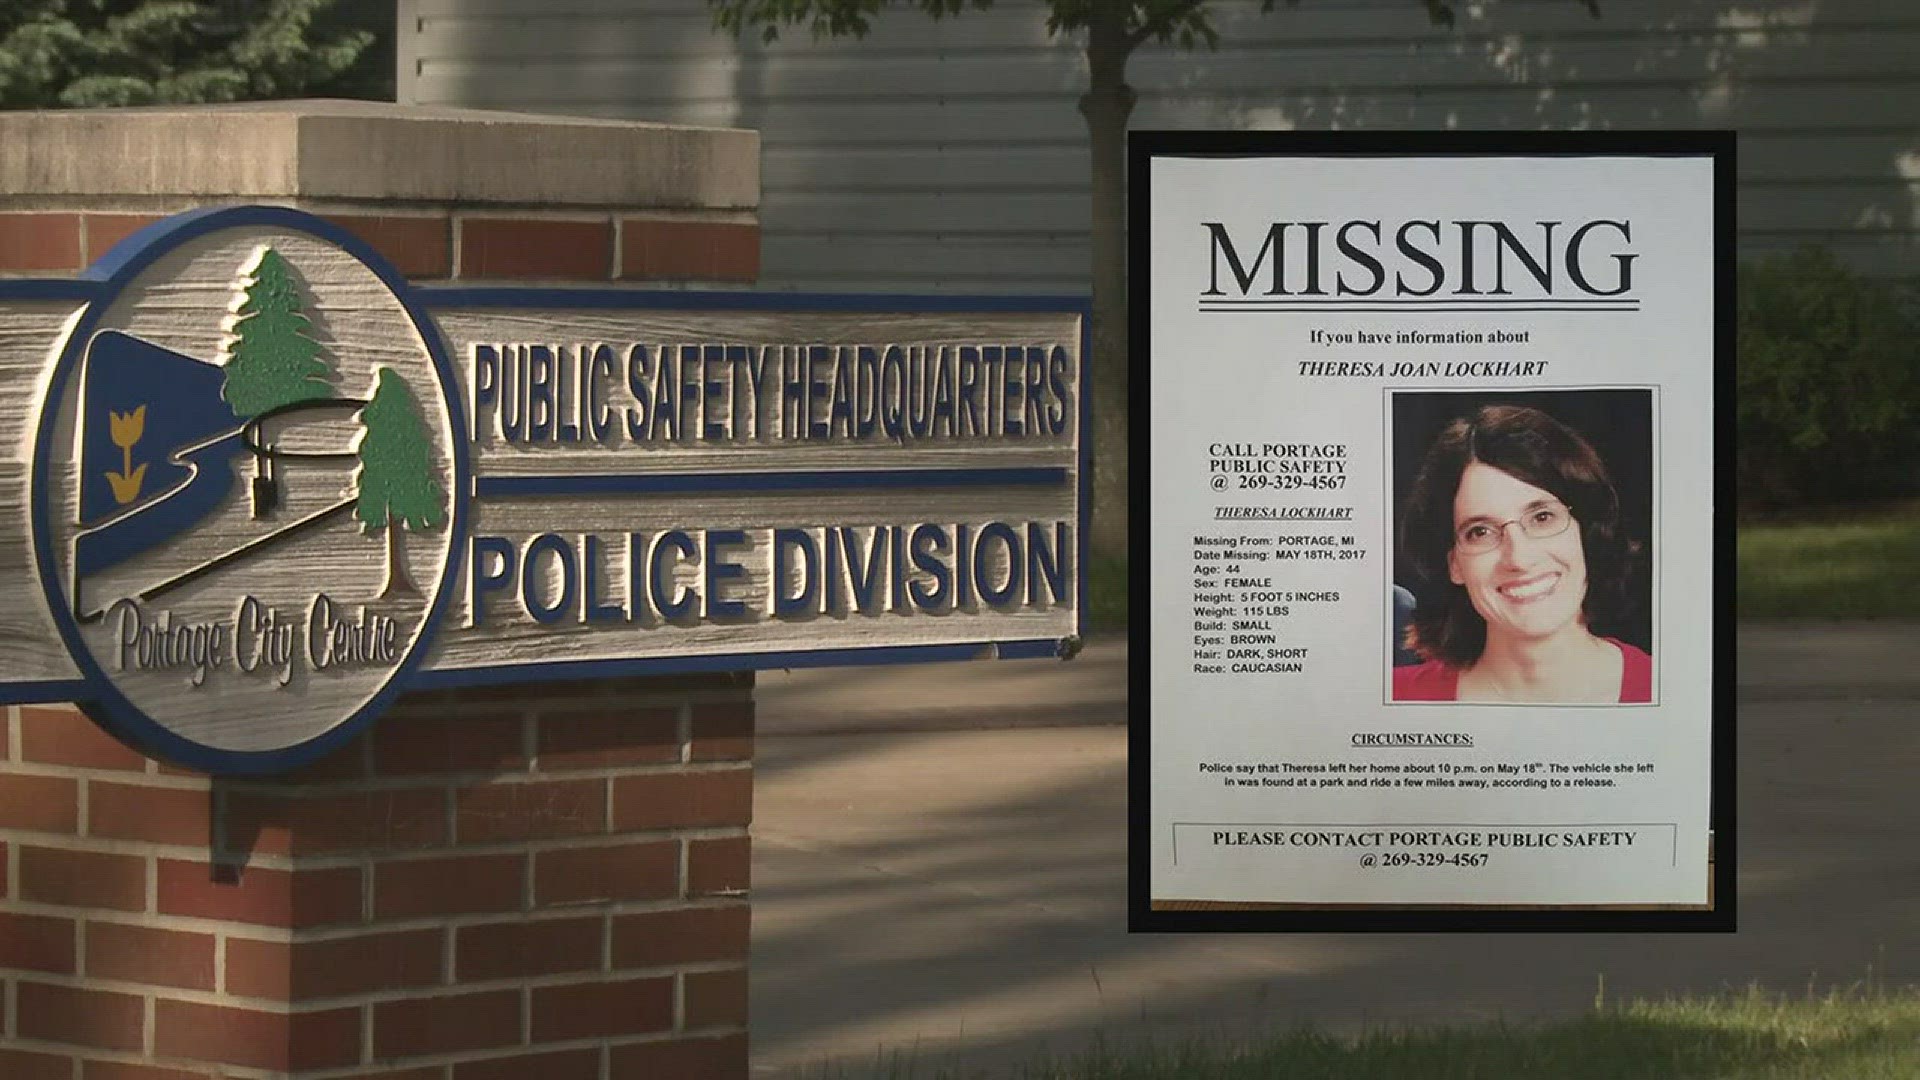 They were going through a rough patch, friend of missing Portage woman speaks wzzm13